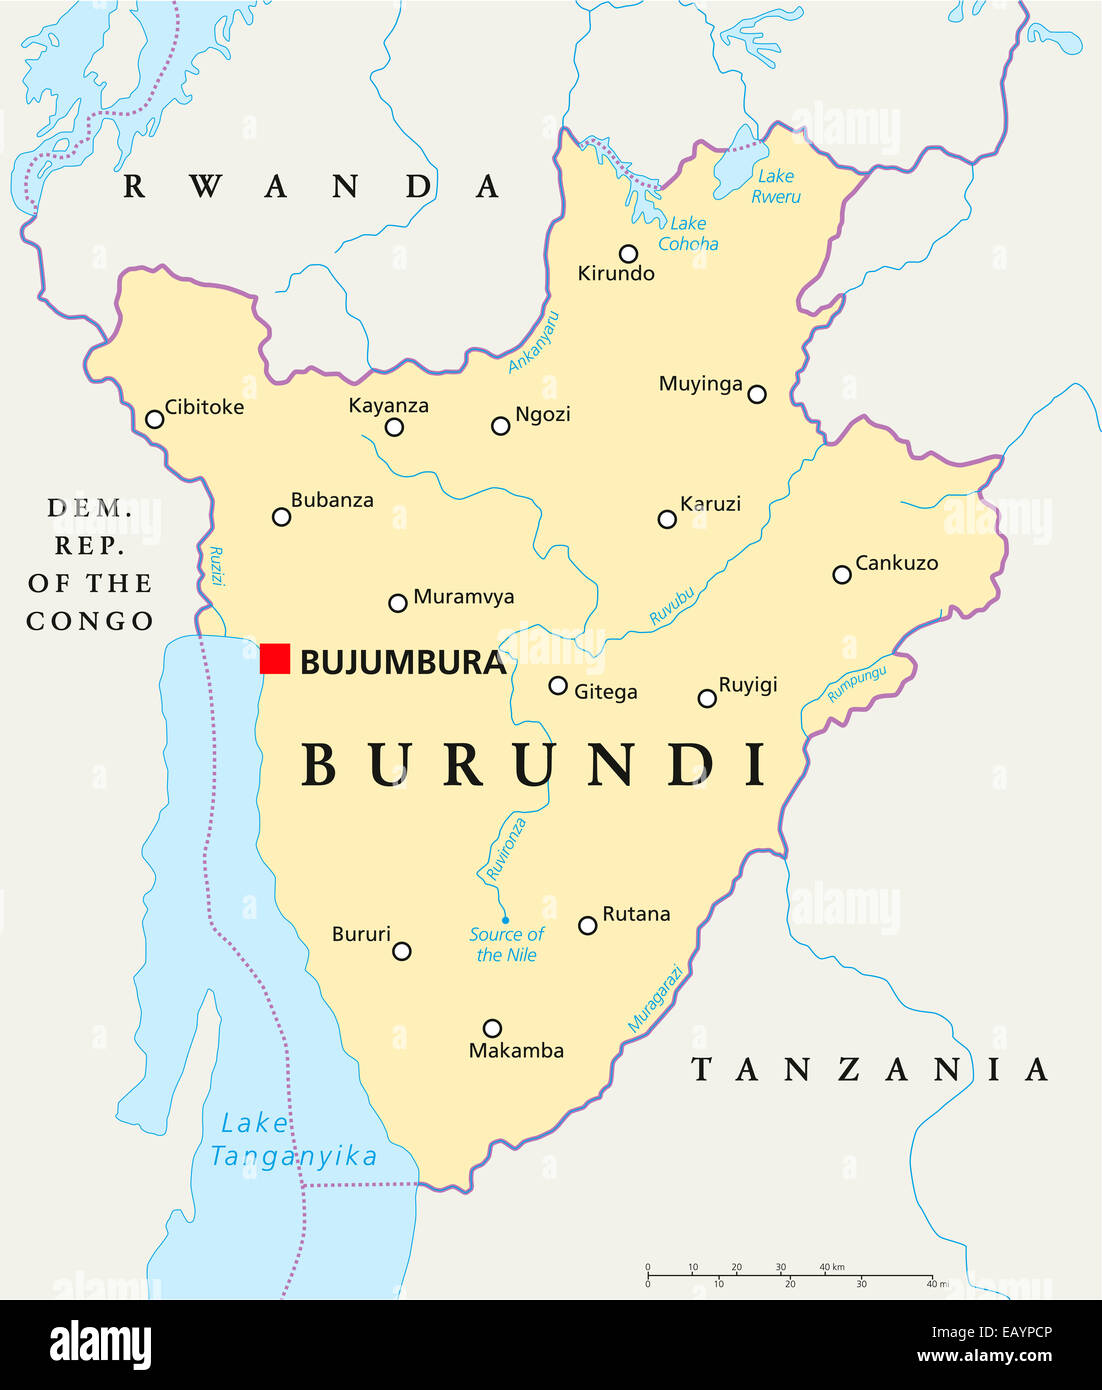 Burundi Political Map with capital Bujumbura, national borders, important cities, rivers and lakes. English labeling and scaling Stock Photo